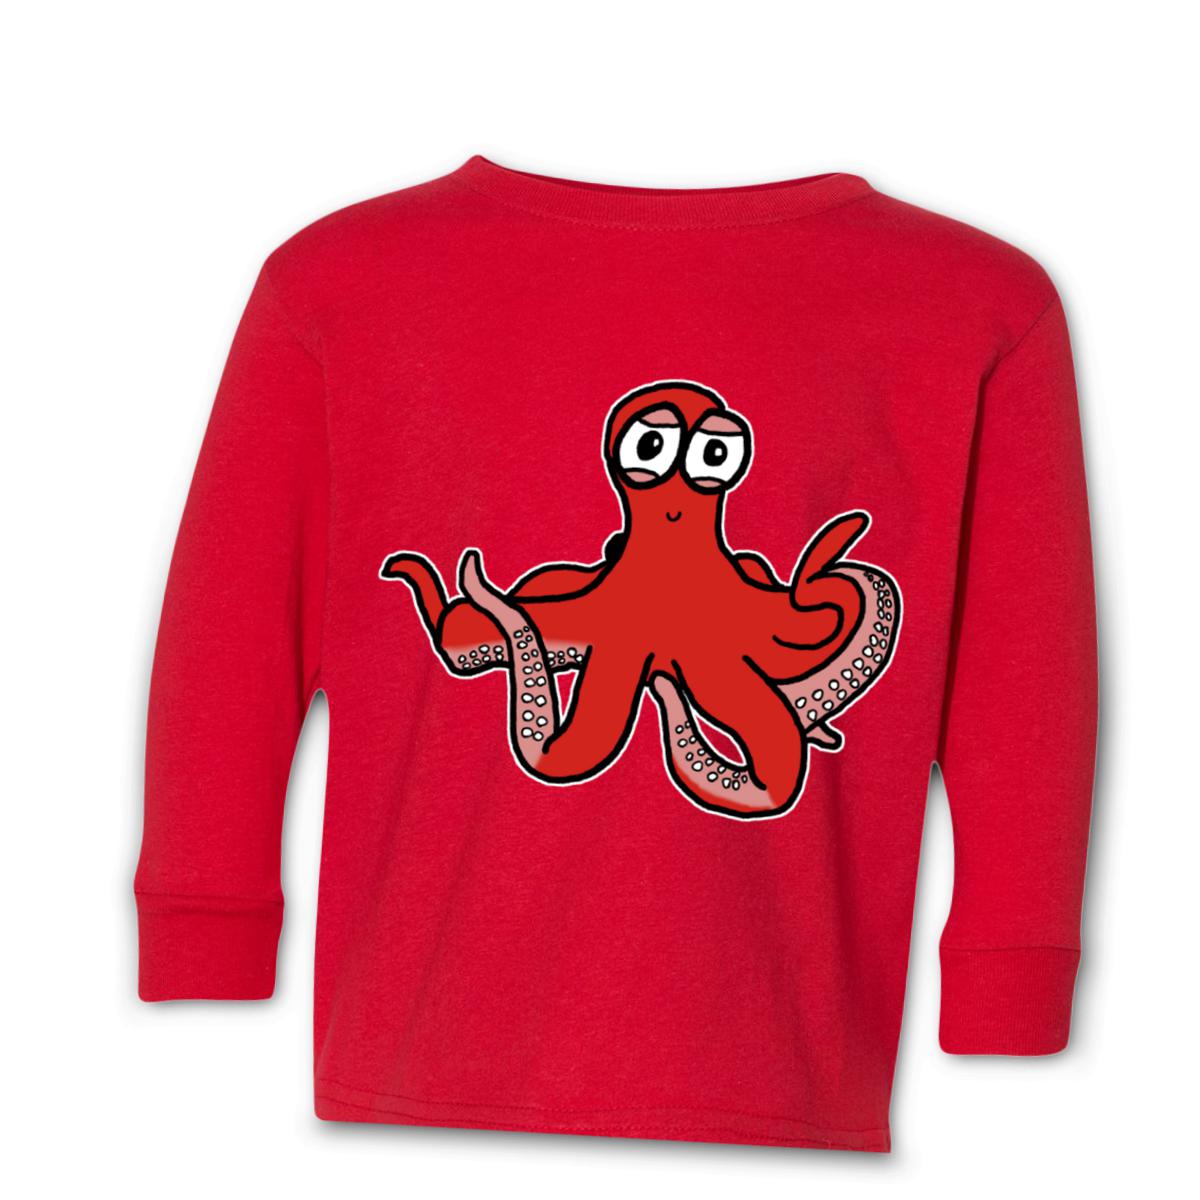 Octopus Toddler Long Sleeve Tee 4T red